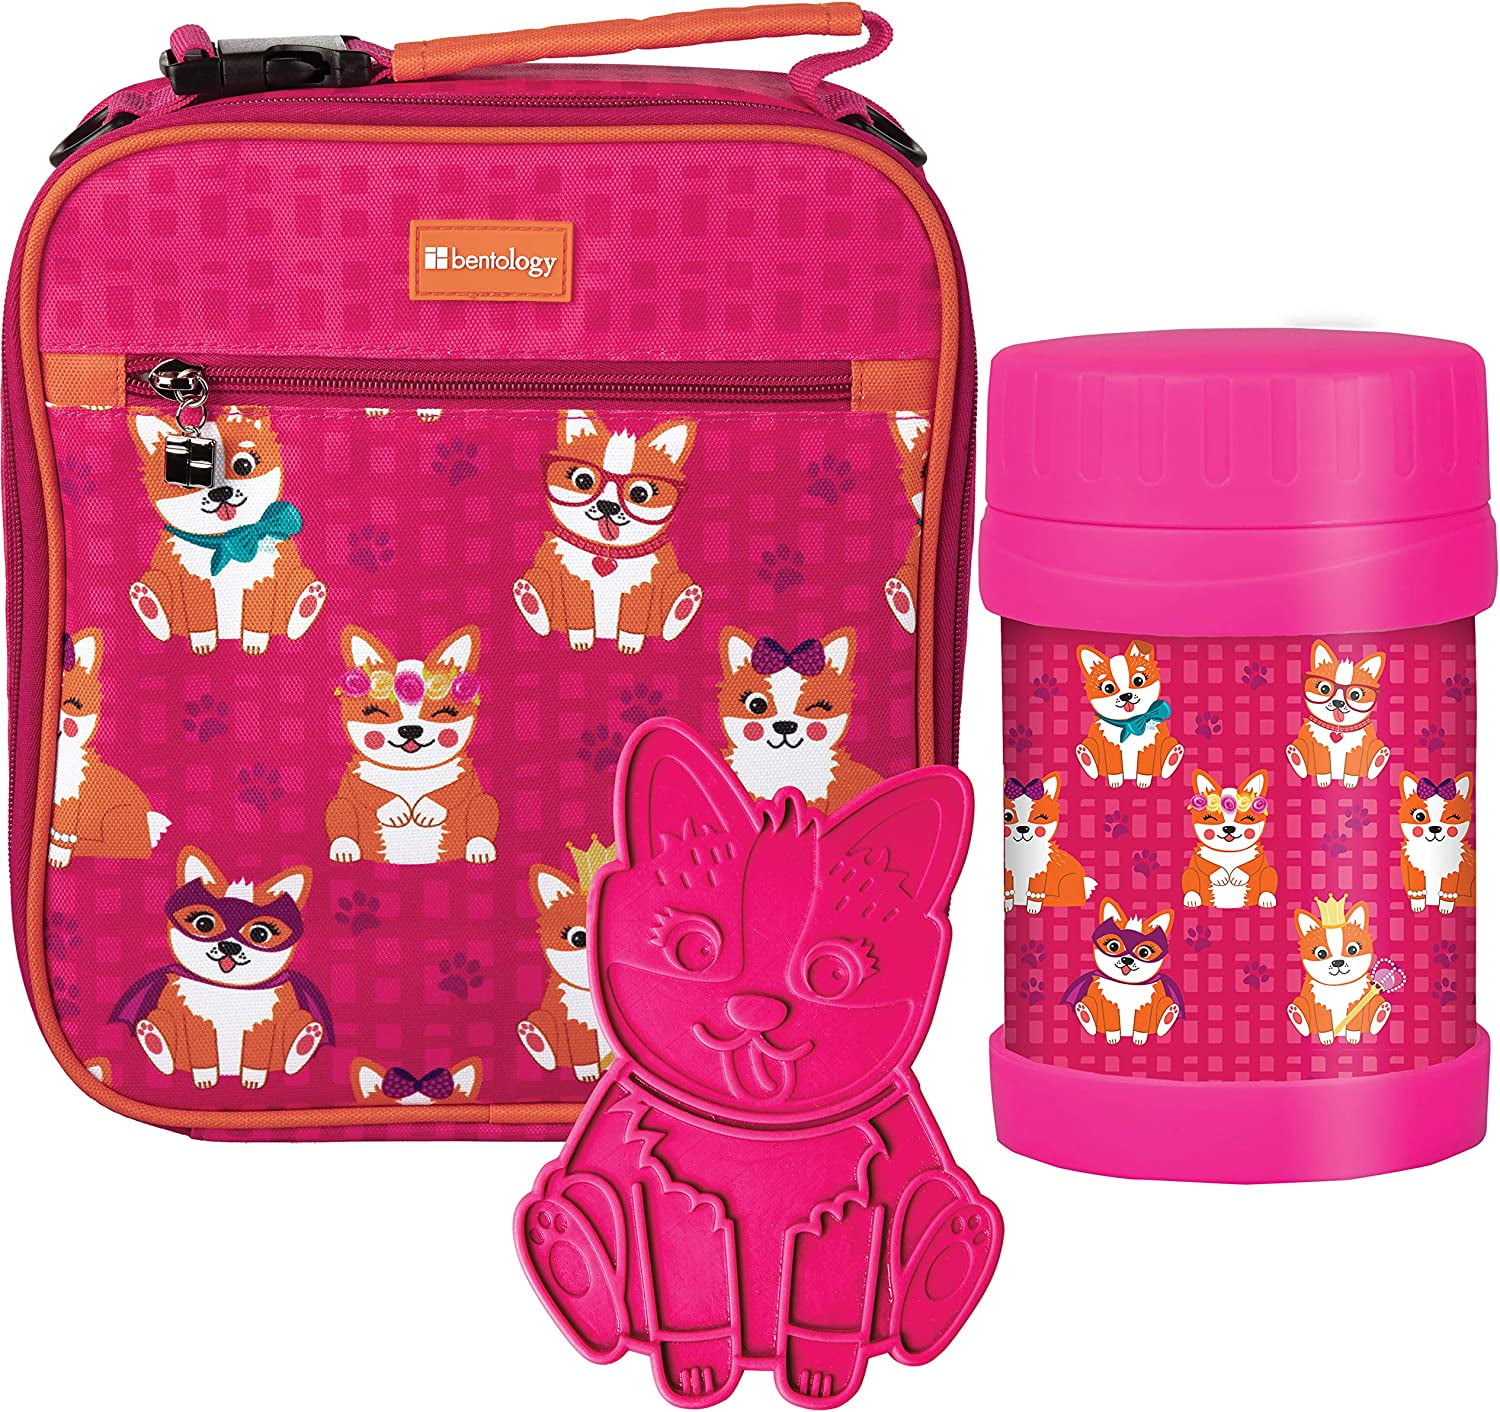 Bento Box with Insulated Lunch Bag, Ice Pack & Water Bottle Set for Kids -  5 Lea 711181213201